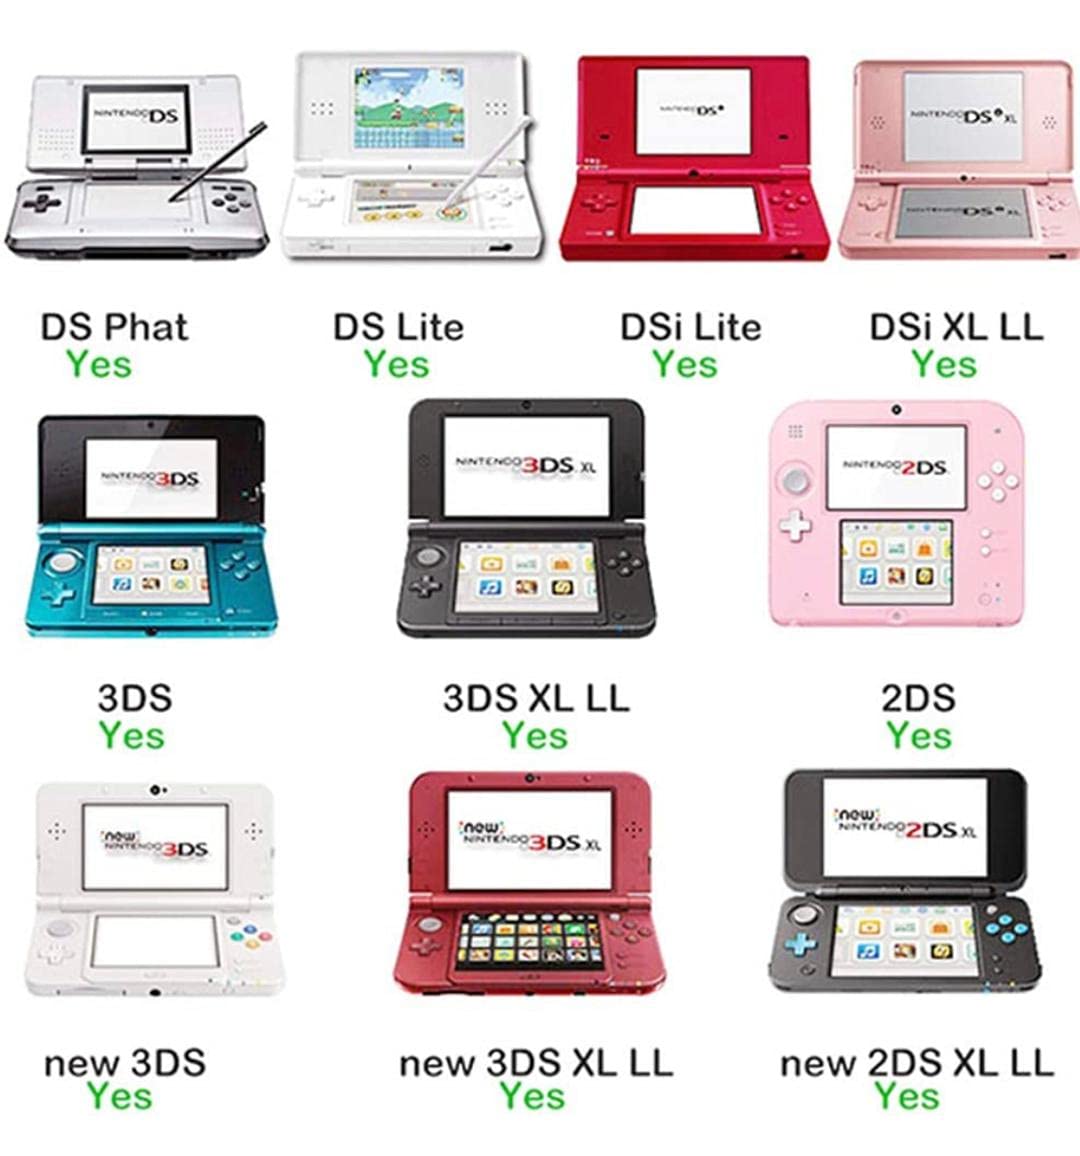 SDHC + USB 2023 Adapter KIT with 8 GB Micro SD Will Work ON DS DSI 2DS 3DS